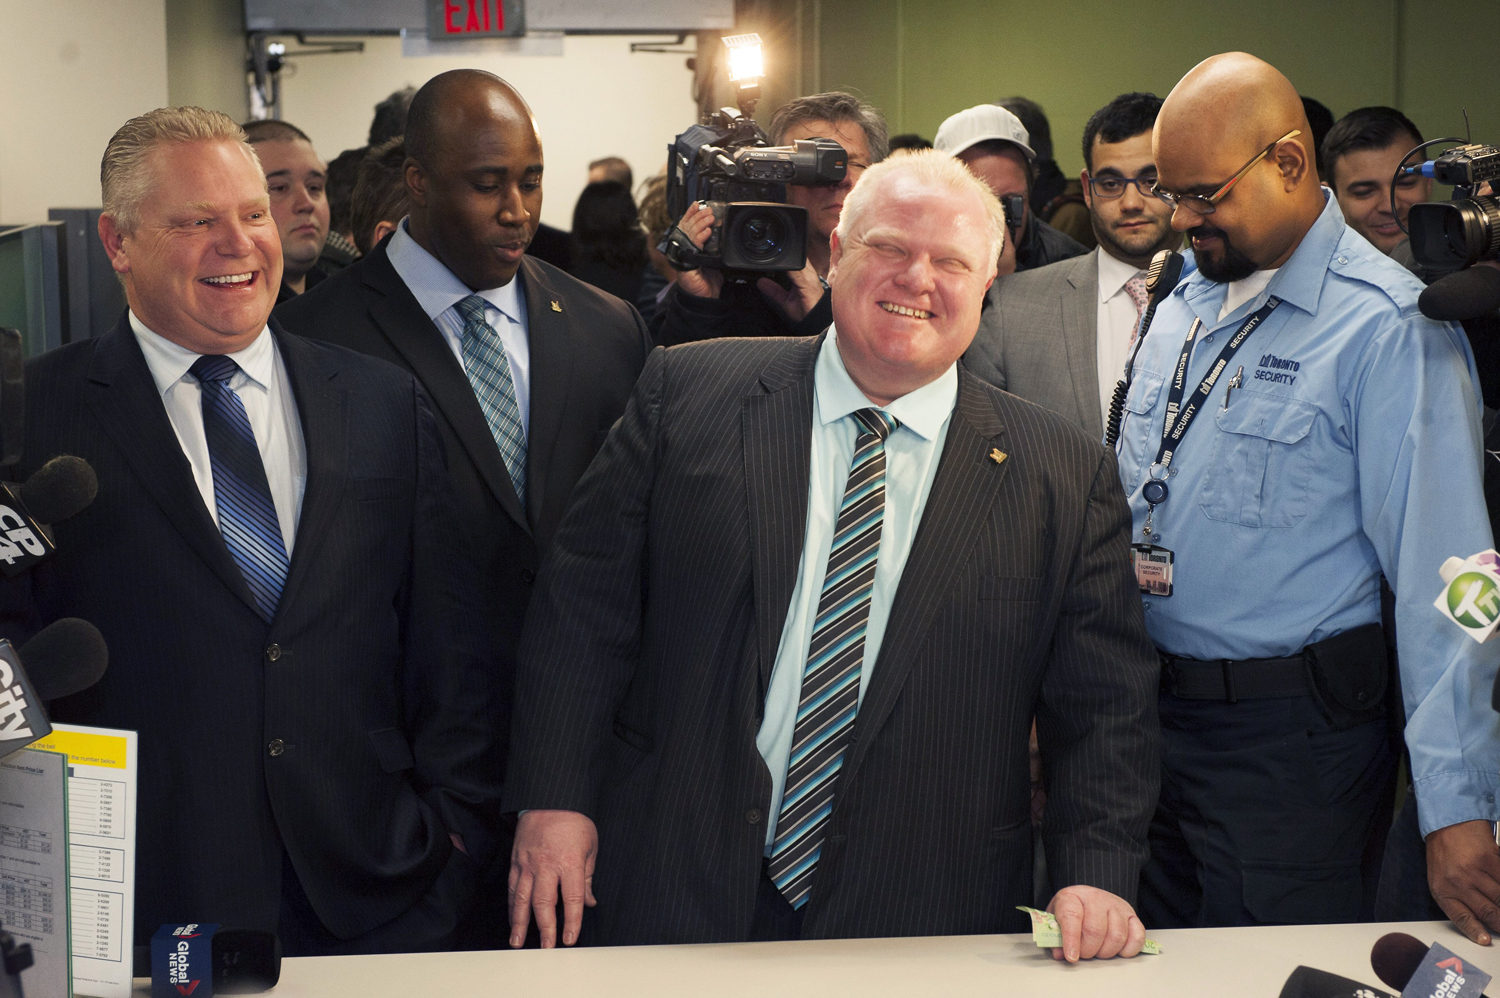 Toronto Mayor Rob Ford on Thursday registers as a candidate for the city's 2014 municipal election in October. Photo: AP